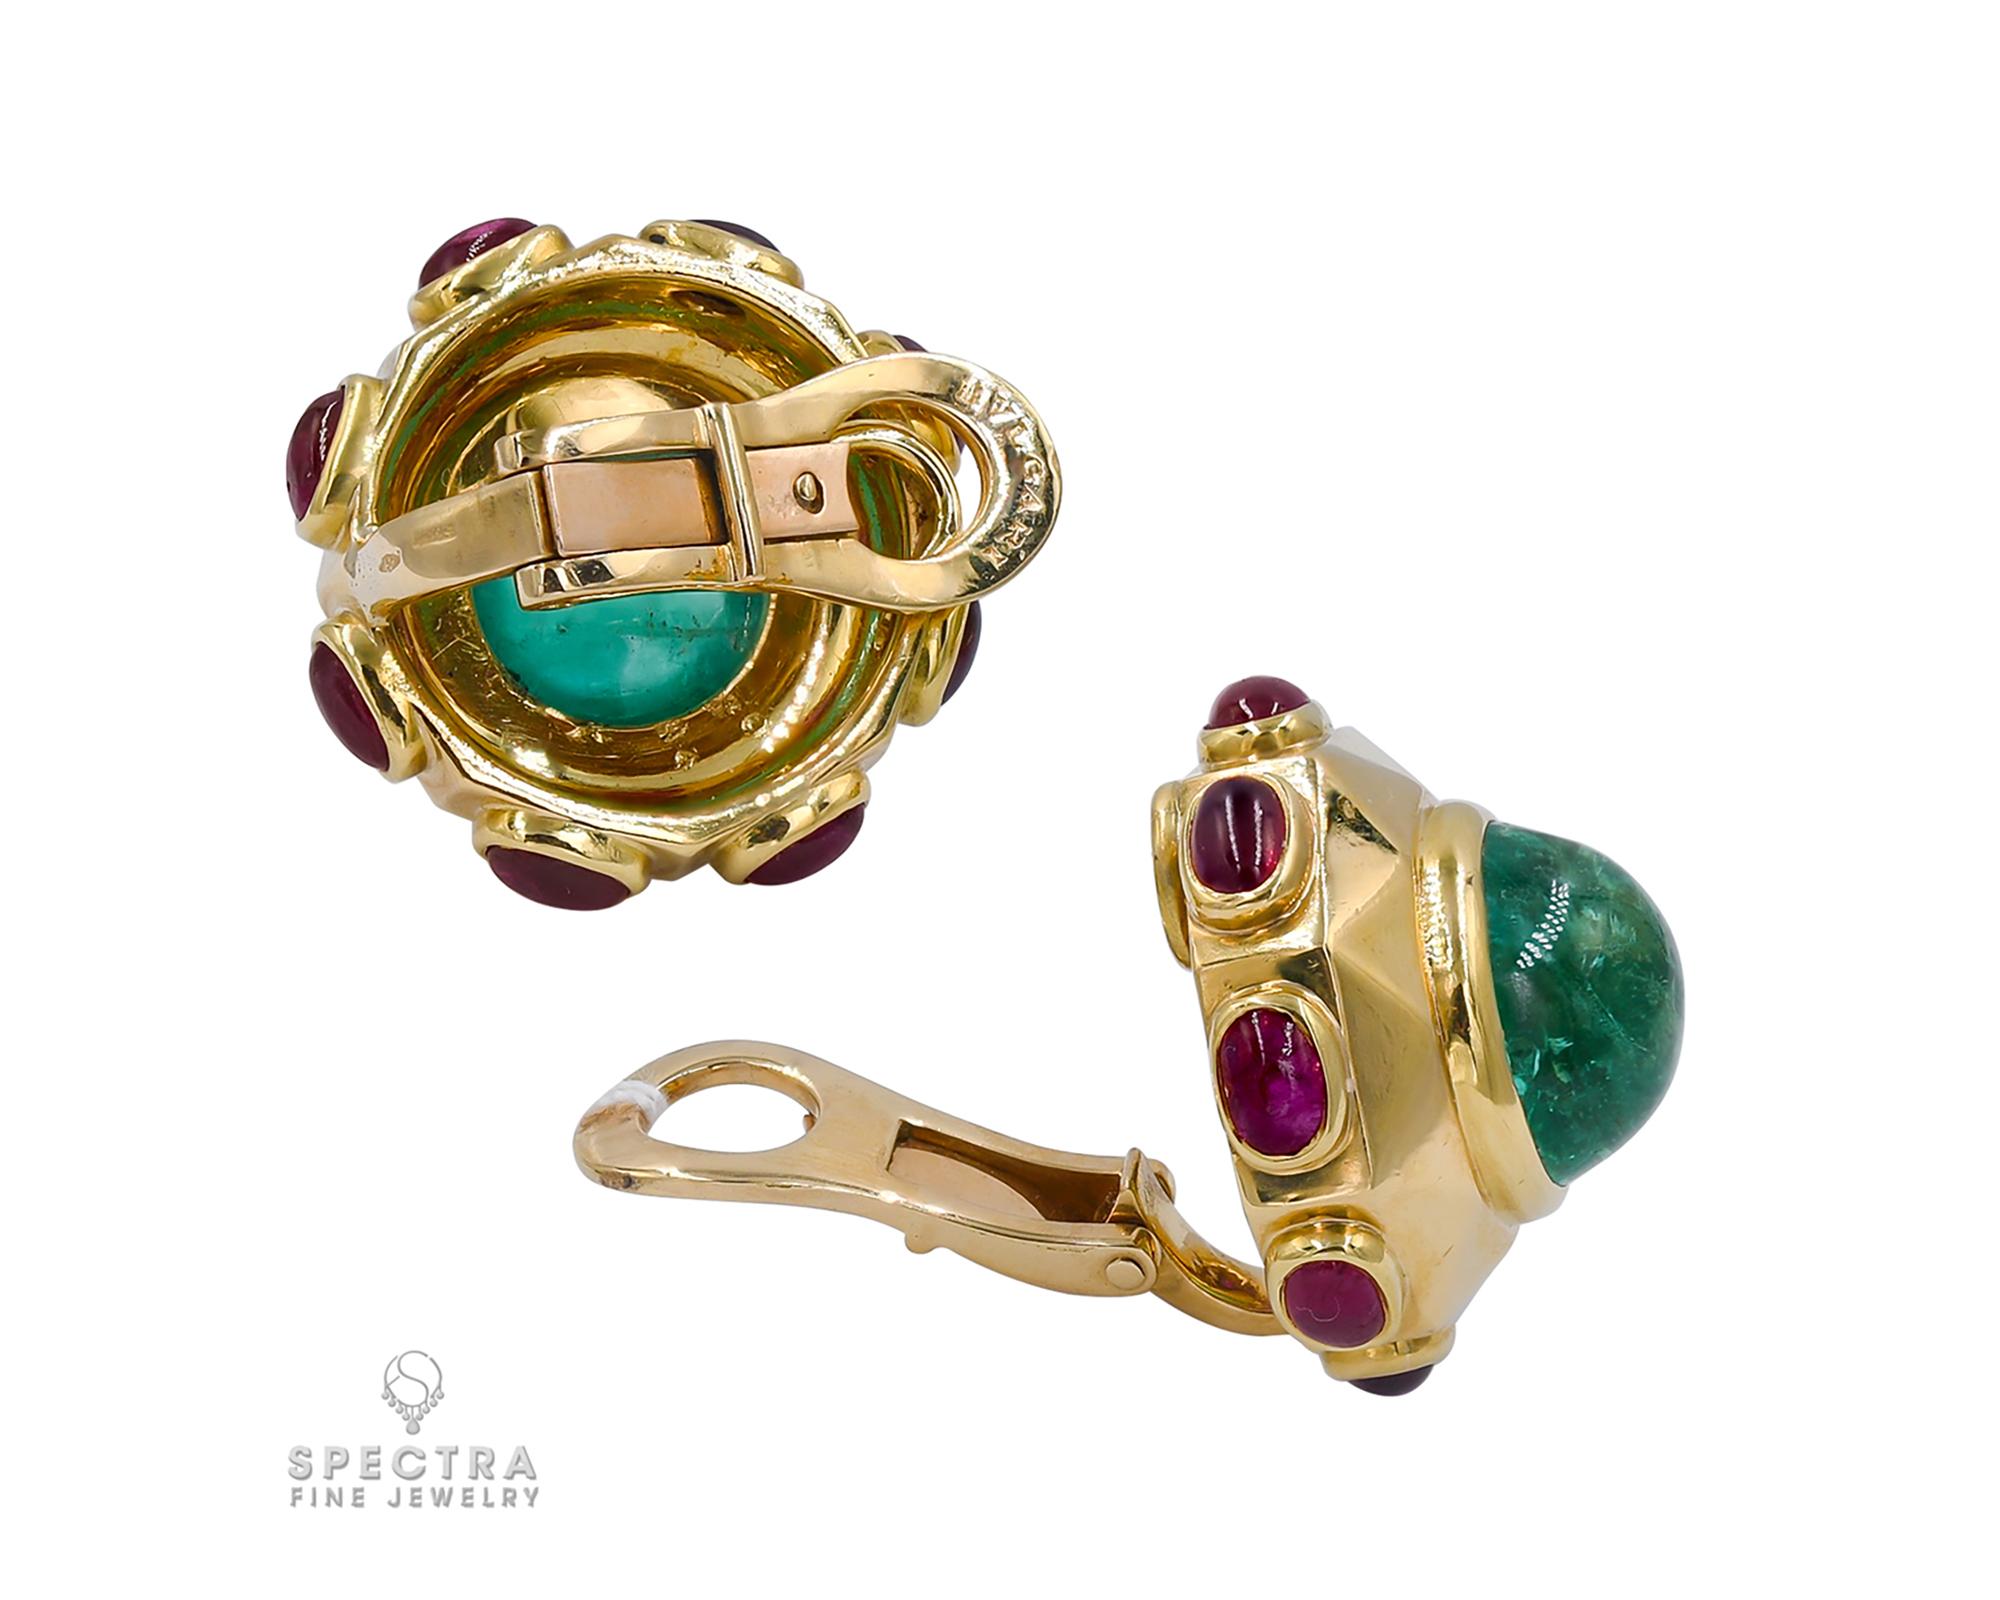 A pair of earrings set with Colombian cabochon emeralds and rubies, made by Bulgari.
Weight of emeralds is approximately 8 carats. 
Circa 1980.
Metal is 18k yellow gold, gross weight is 24.14 gr.
Clip-on style.
Signed Bvlgari.